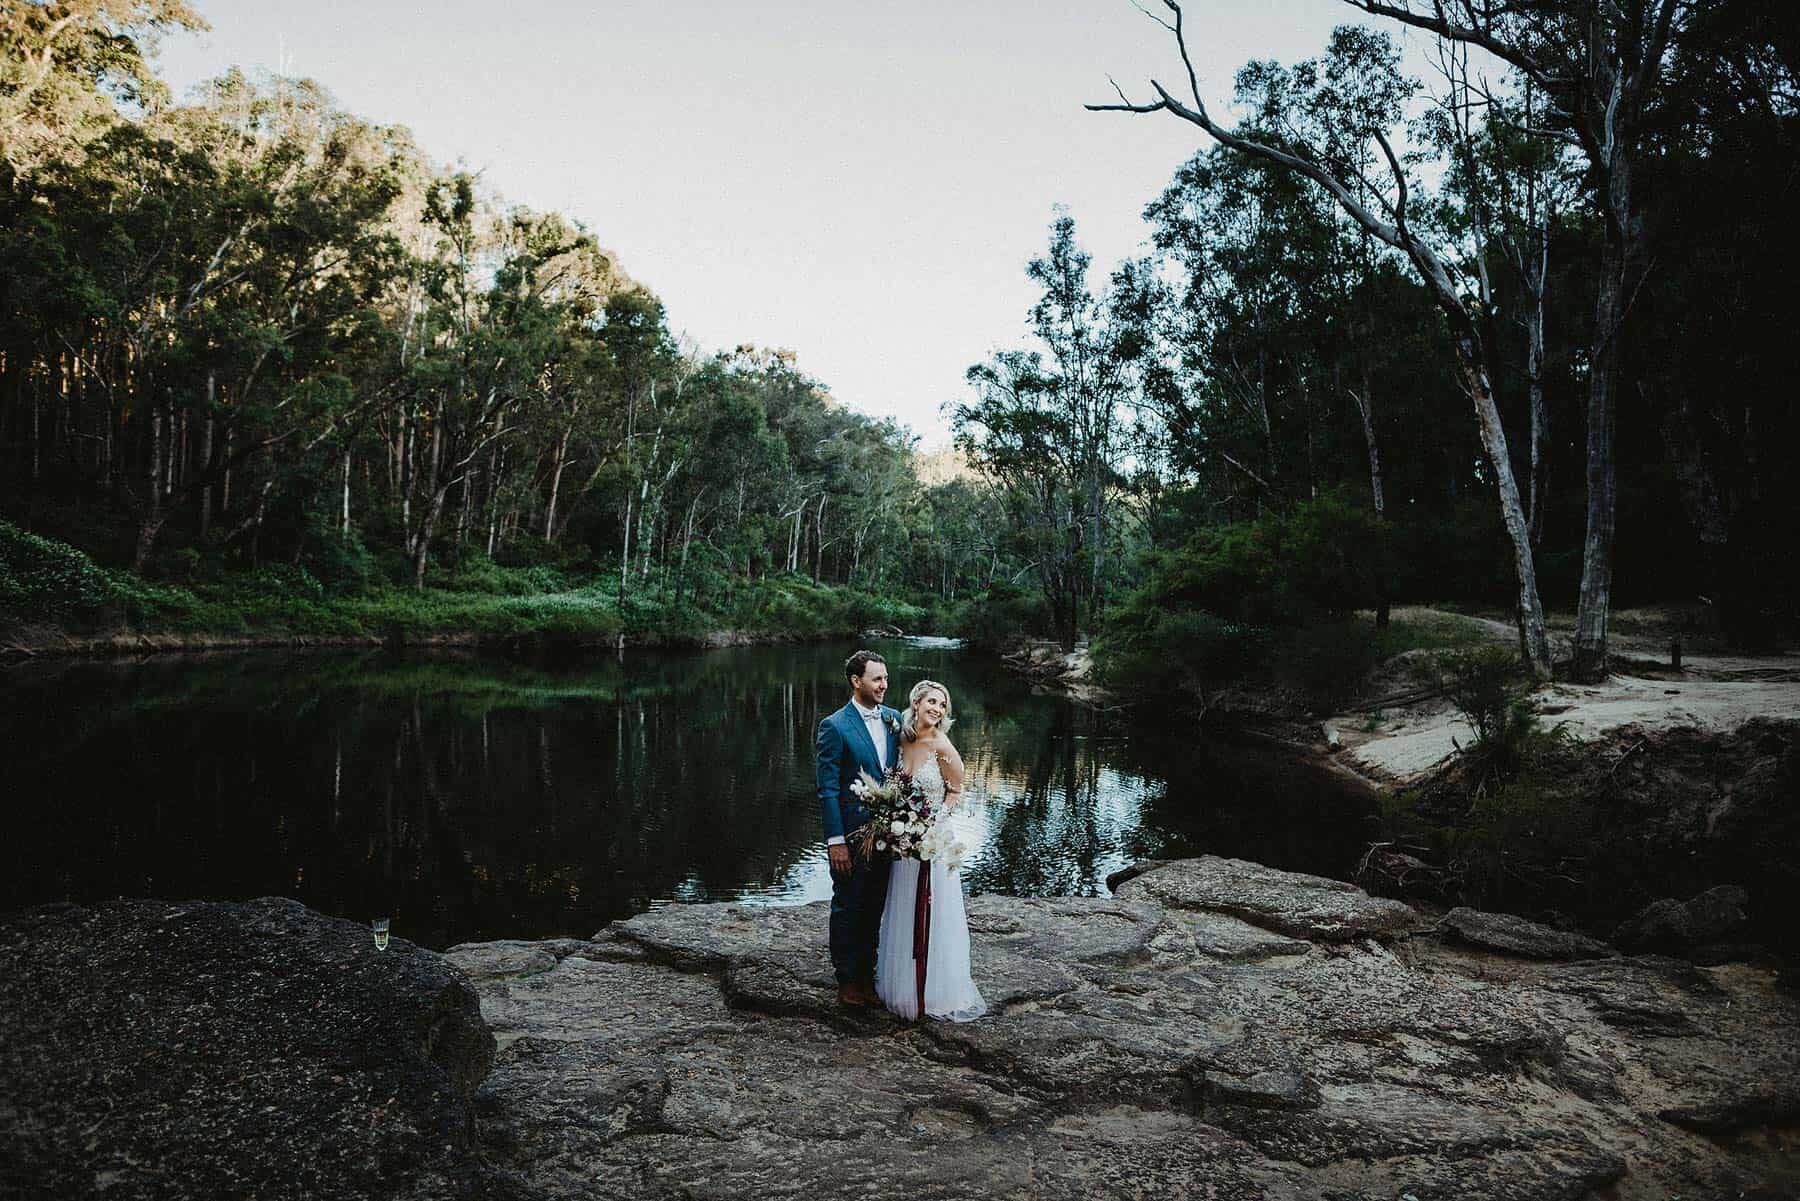 Boho couple get married in South west forest wedding at Nanga Bush Camp / CJ Williams Photography